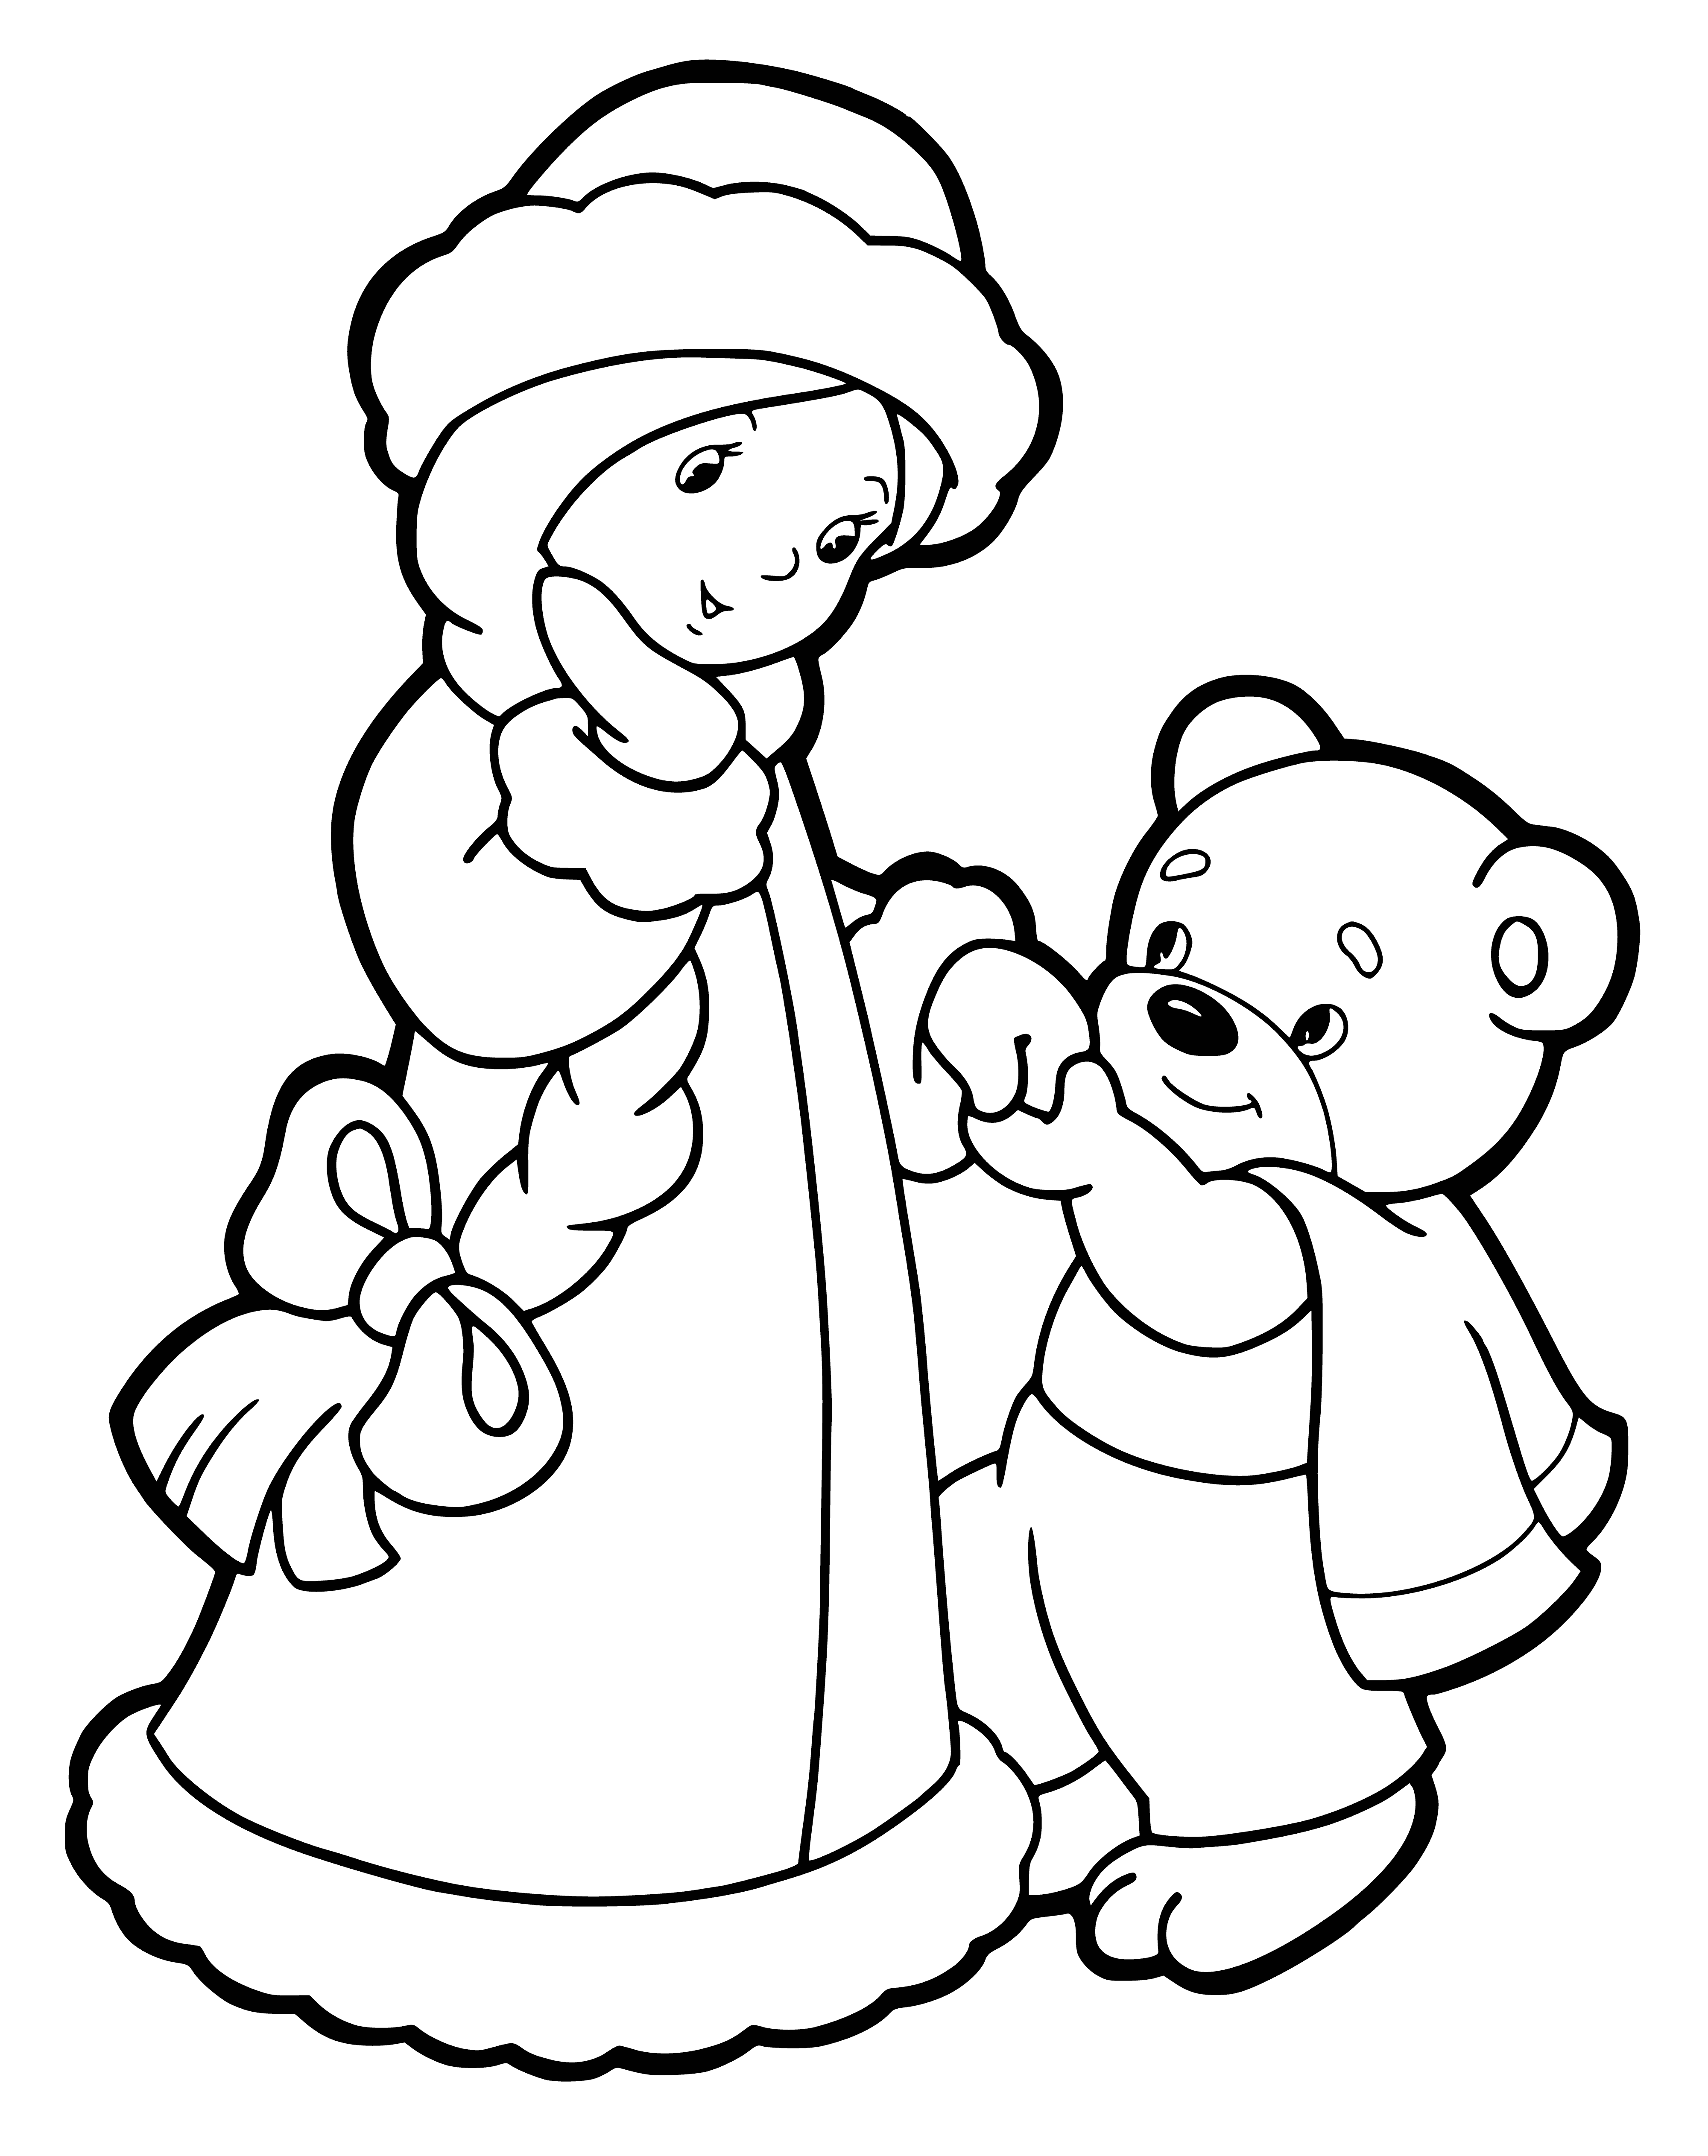 Snow Maiden in white dress holding teddy bear; hat w/ red ribbon, bear brown. #coloringpage #snowmaiden #teddybear